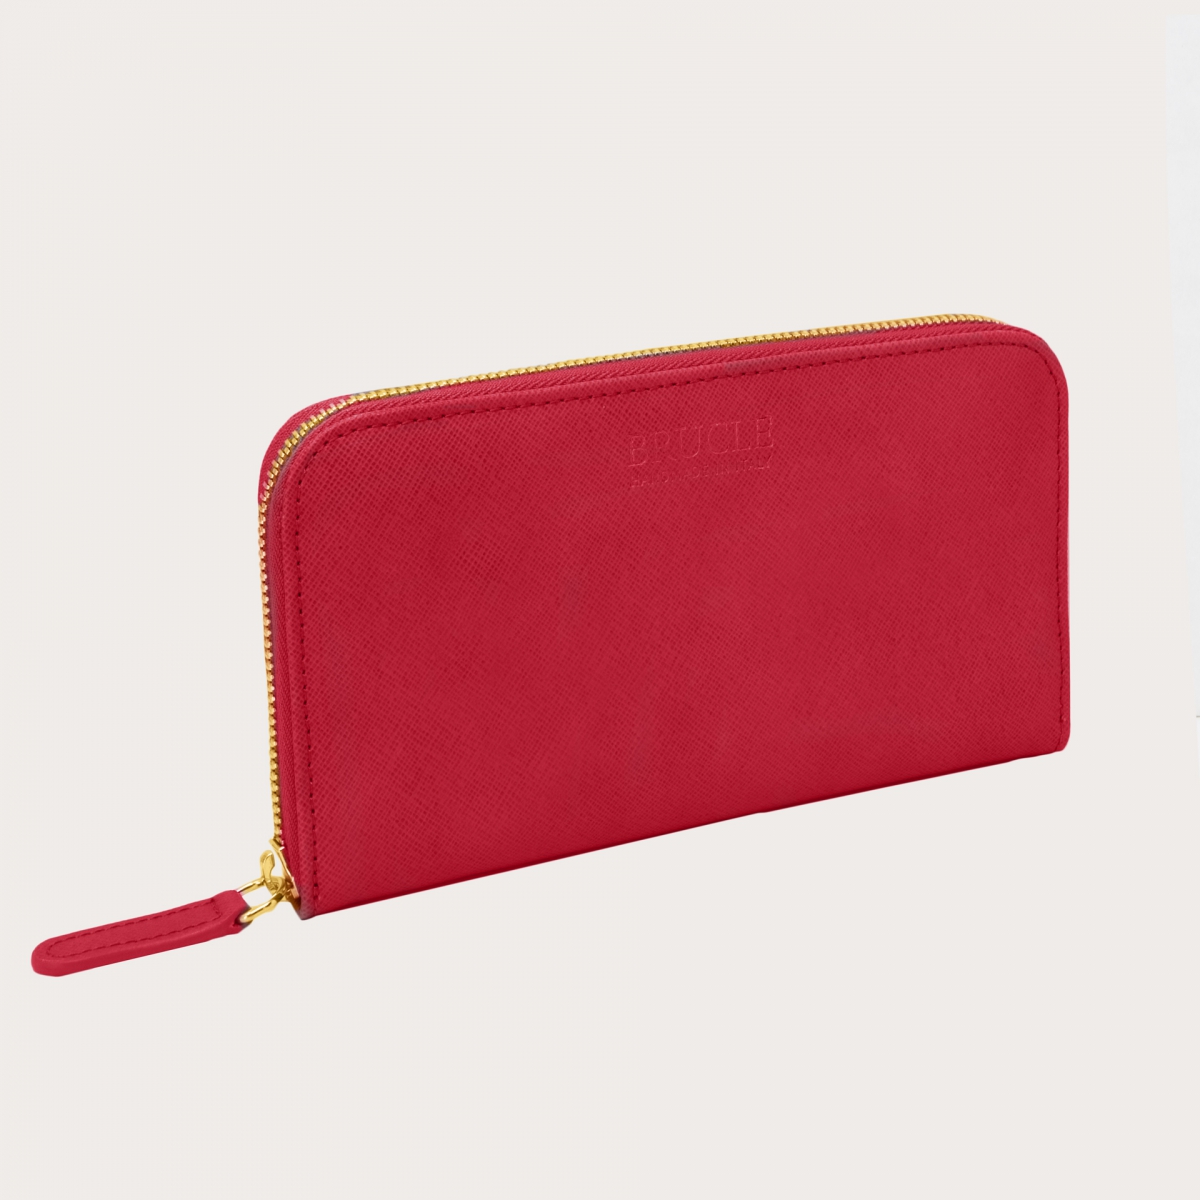 BRUCLE Elegant women's wallet in saffiano print with gold zip, ruby red